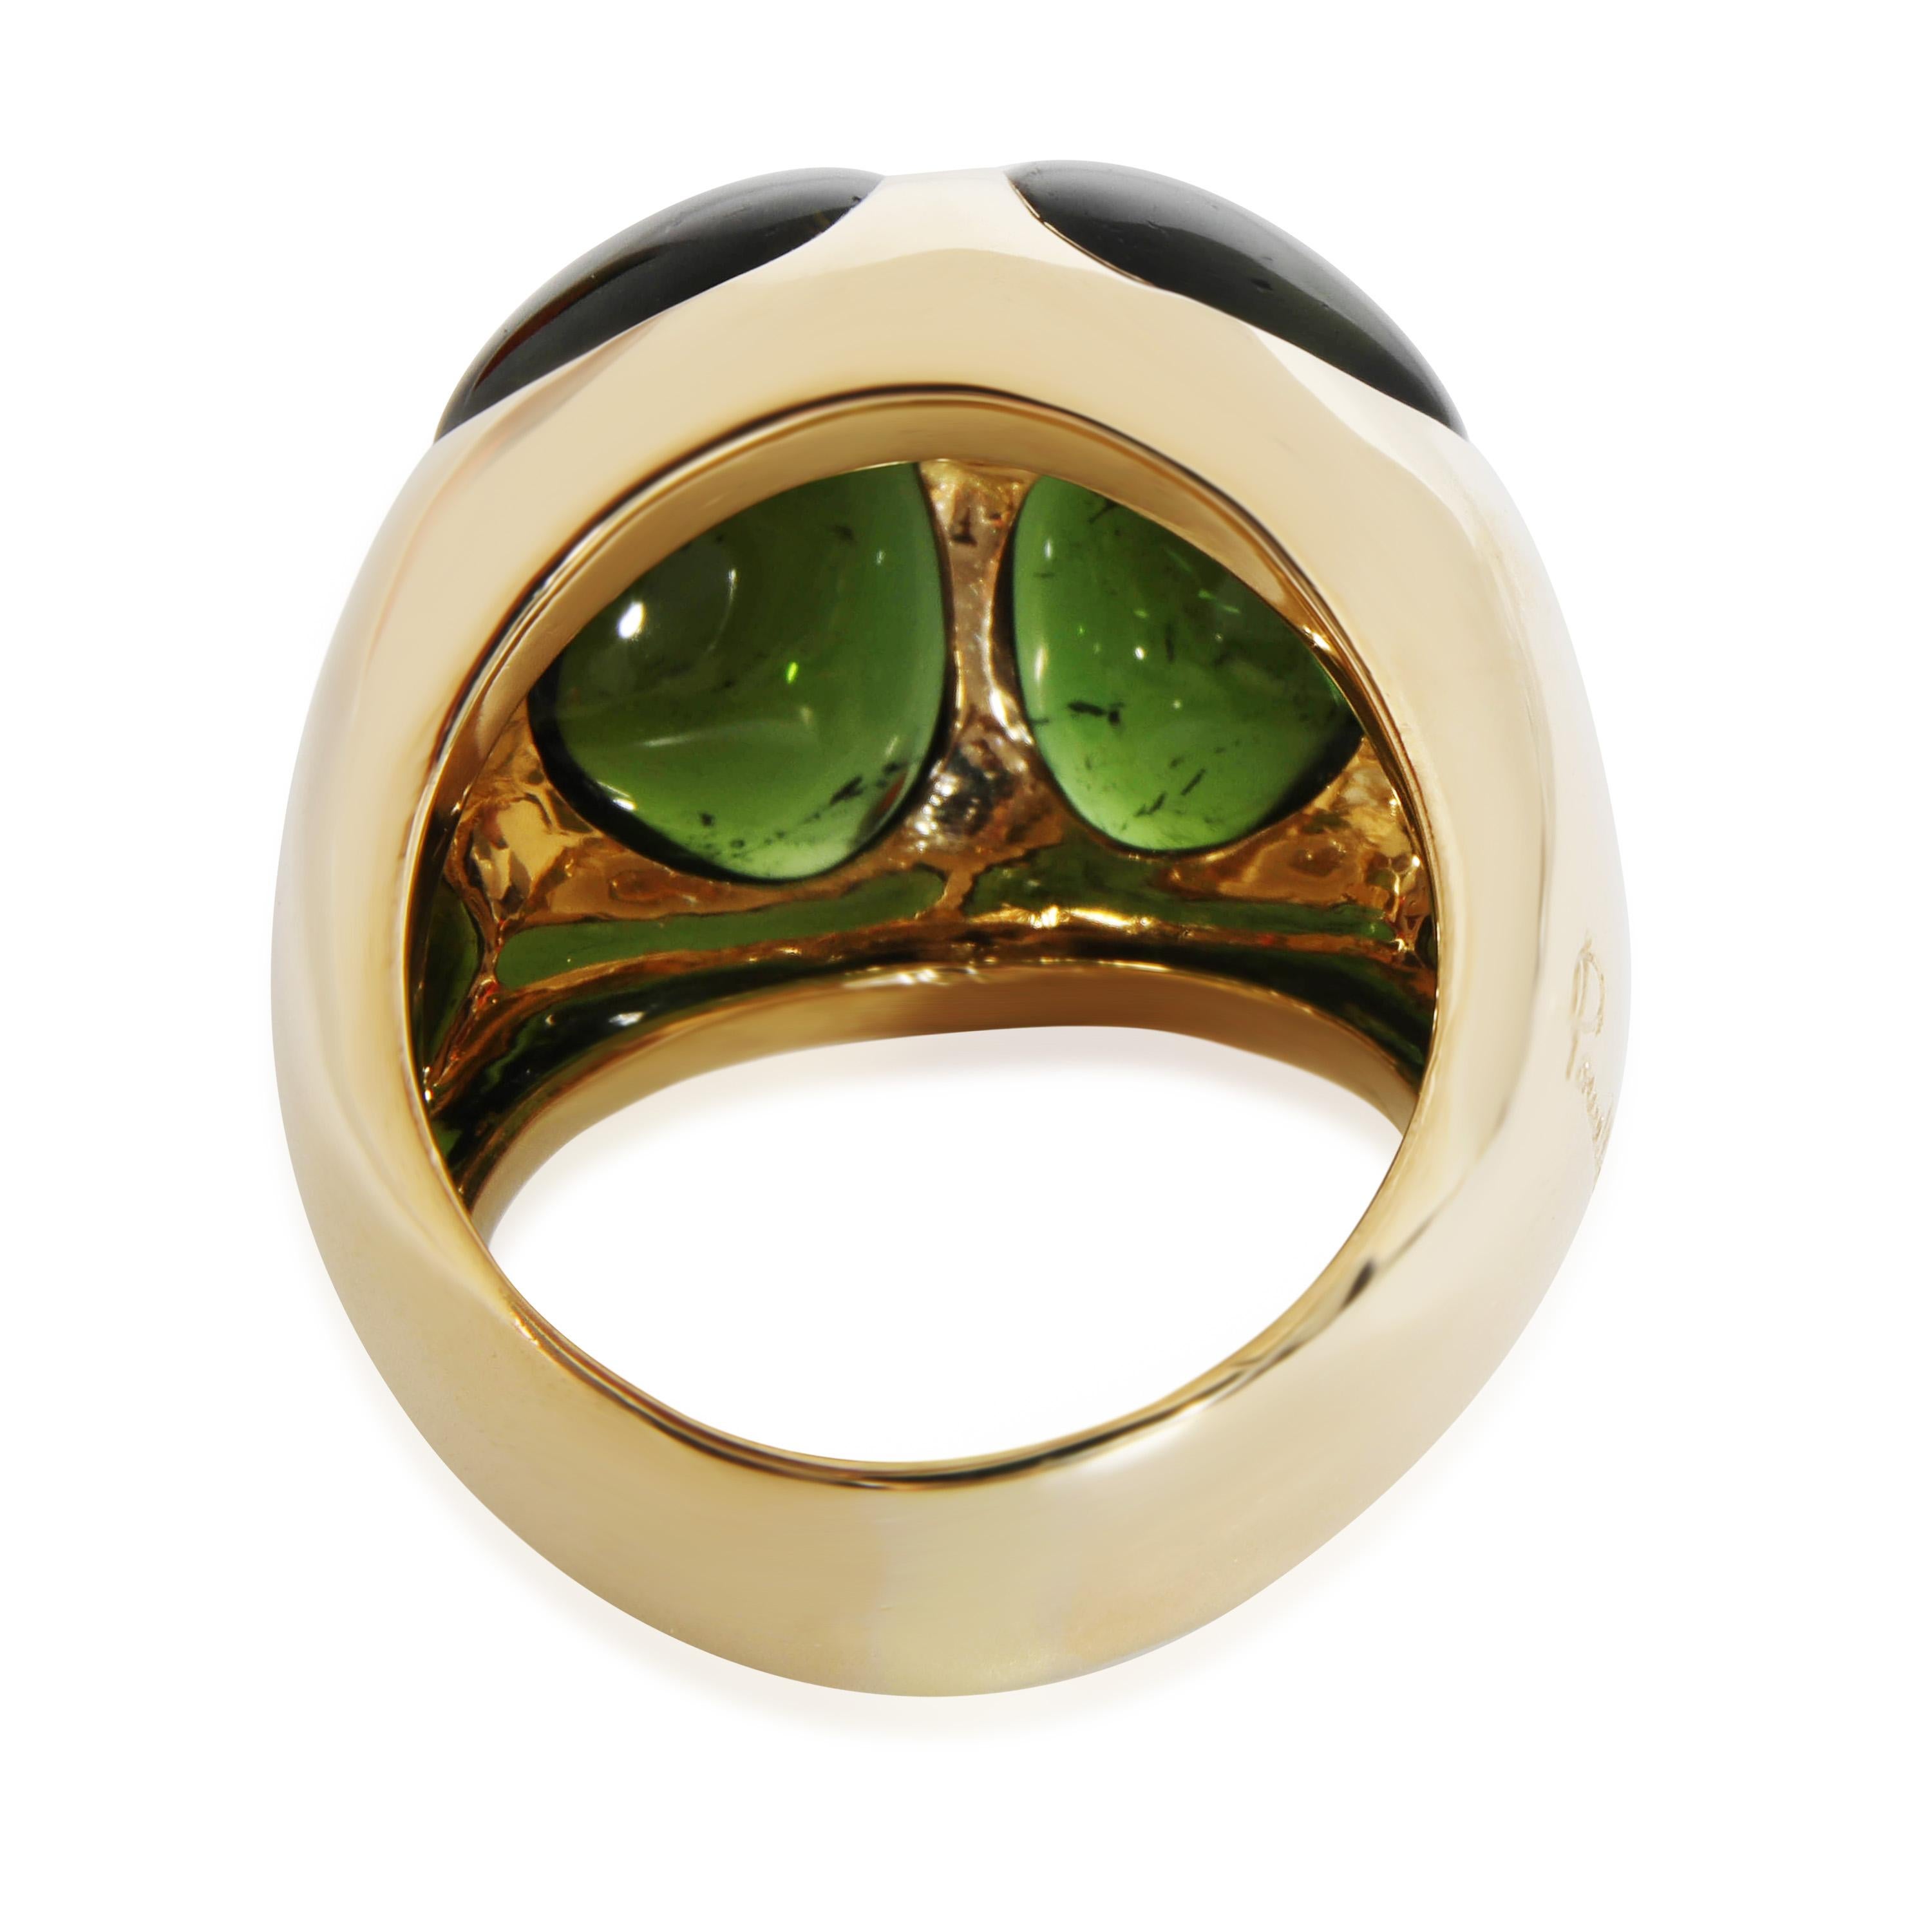 Women's or Men's Pomellato Iconica Green Tourmaline Cocktail Ring in 18k Yellow Gold